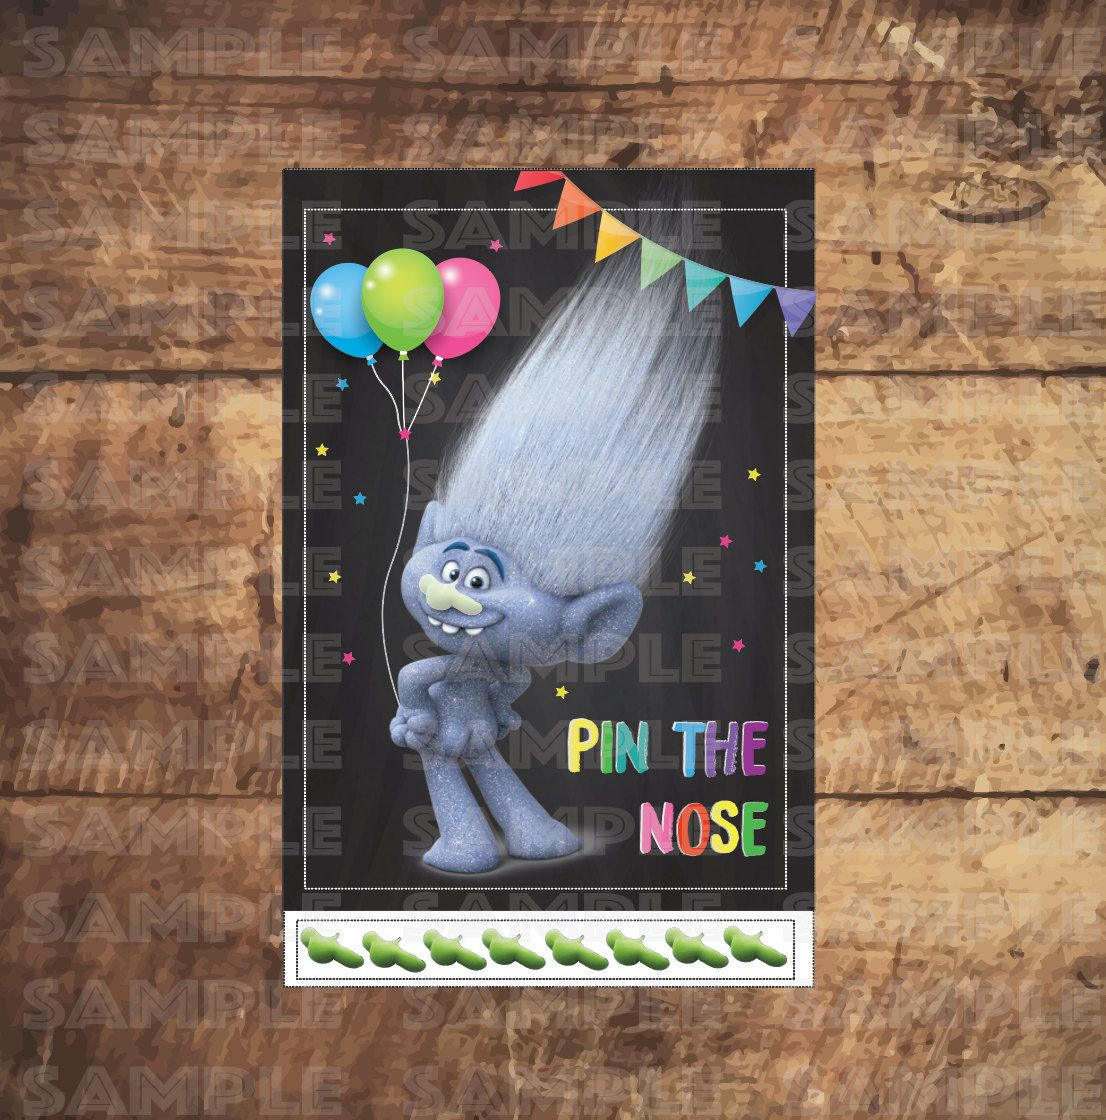 Trolls Party Game Ideas
 TROLLS PARTY GAME Pin The Nose Pin the Tail Trolls